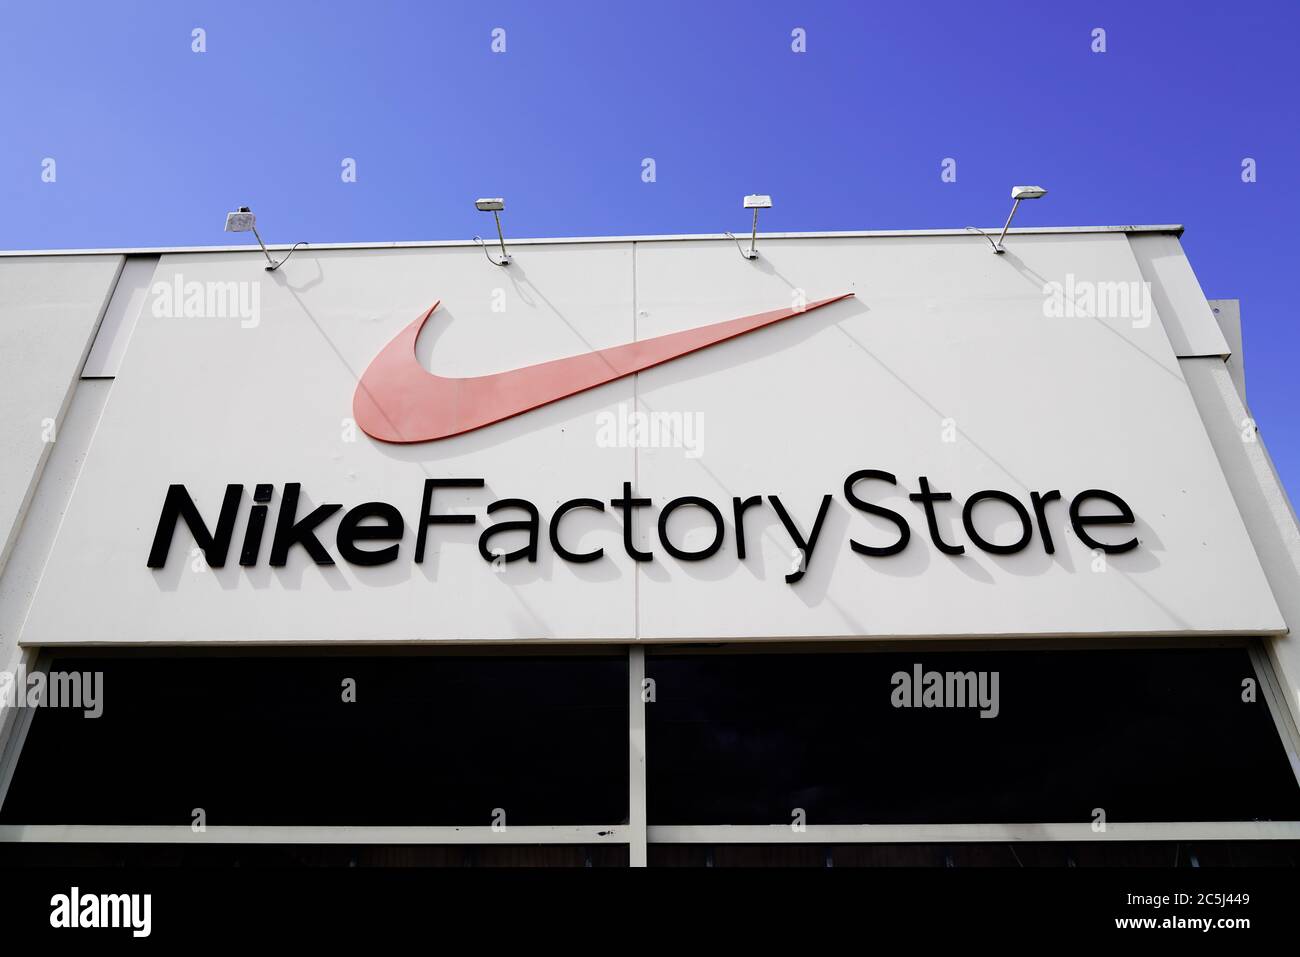 Bordeaux , Aquitaine / France - 07 02 2020 : Nike Factory Store logo and text sign in shop storefront Stock Photo